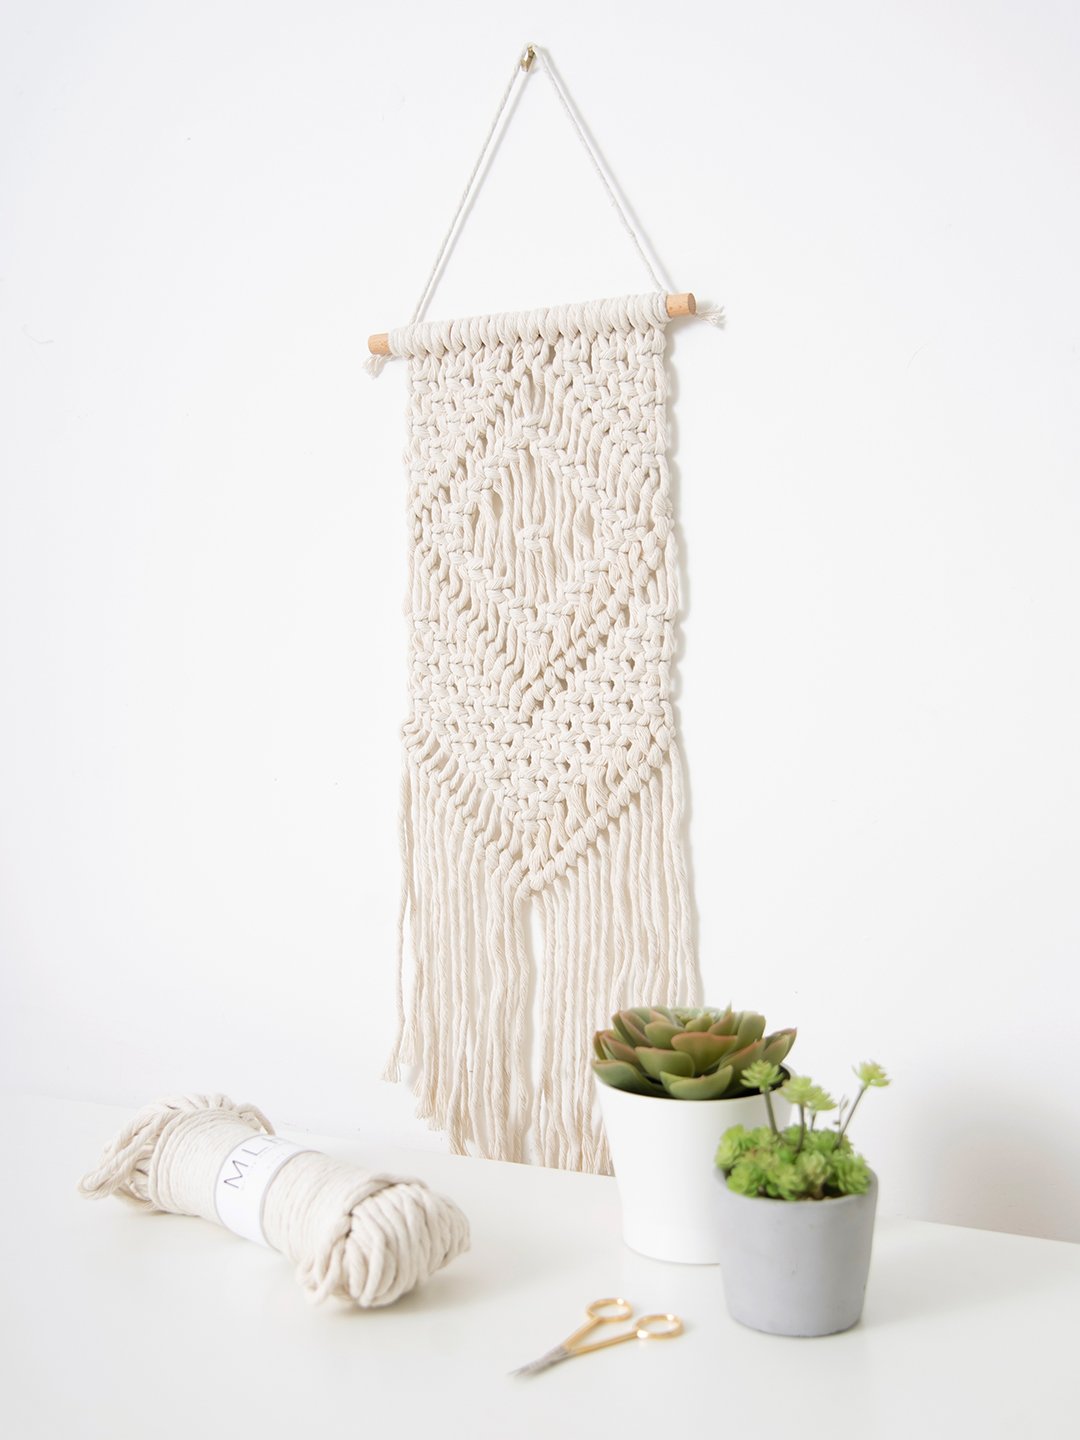 Incraftables Macrame Kits for Adults Beginners & Kids. Macrame Supplies for  Plant Hanger & Wall Hanging